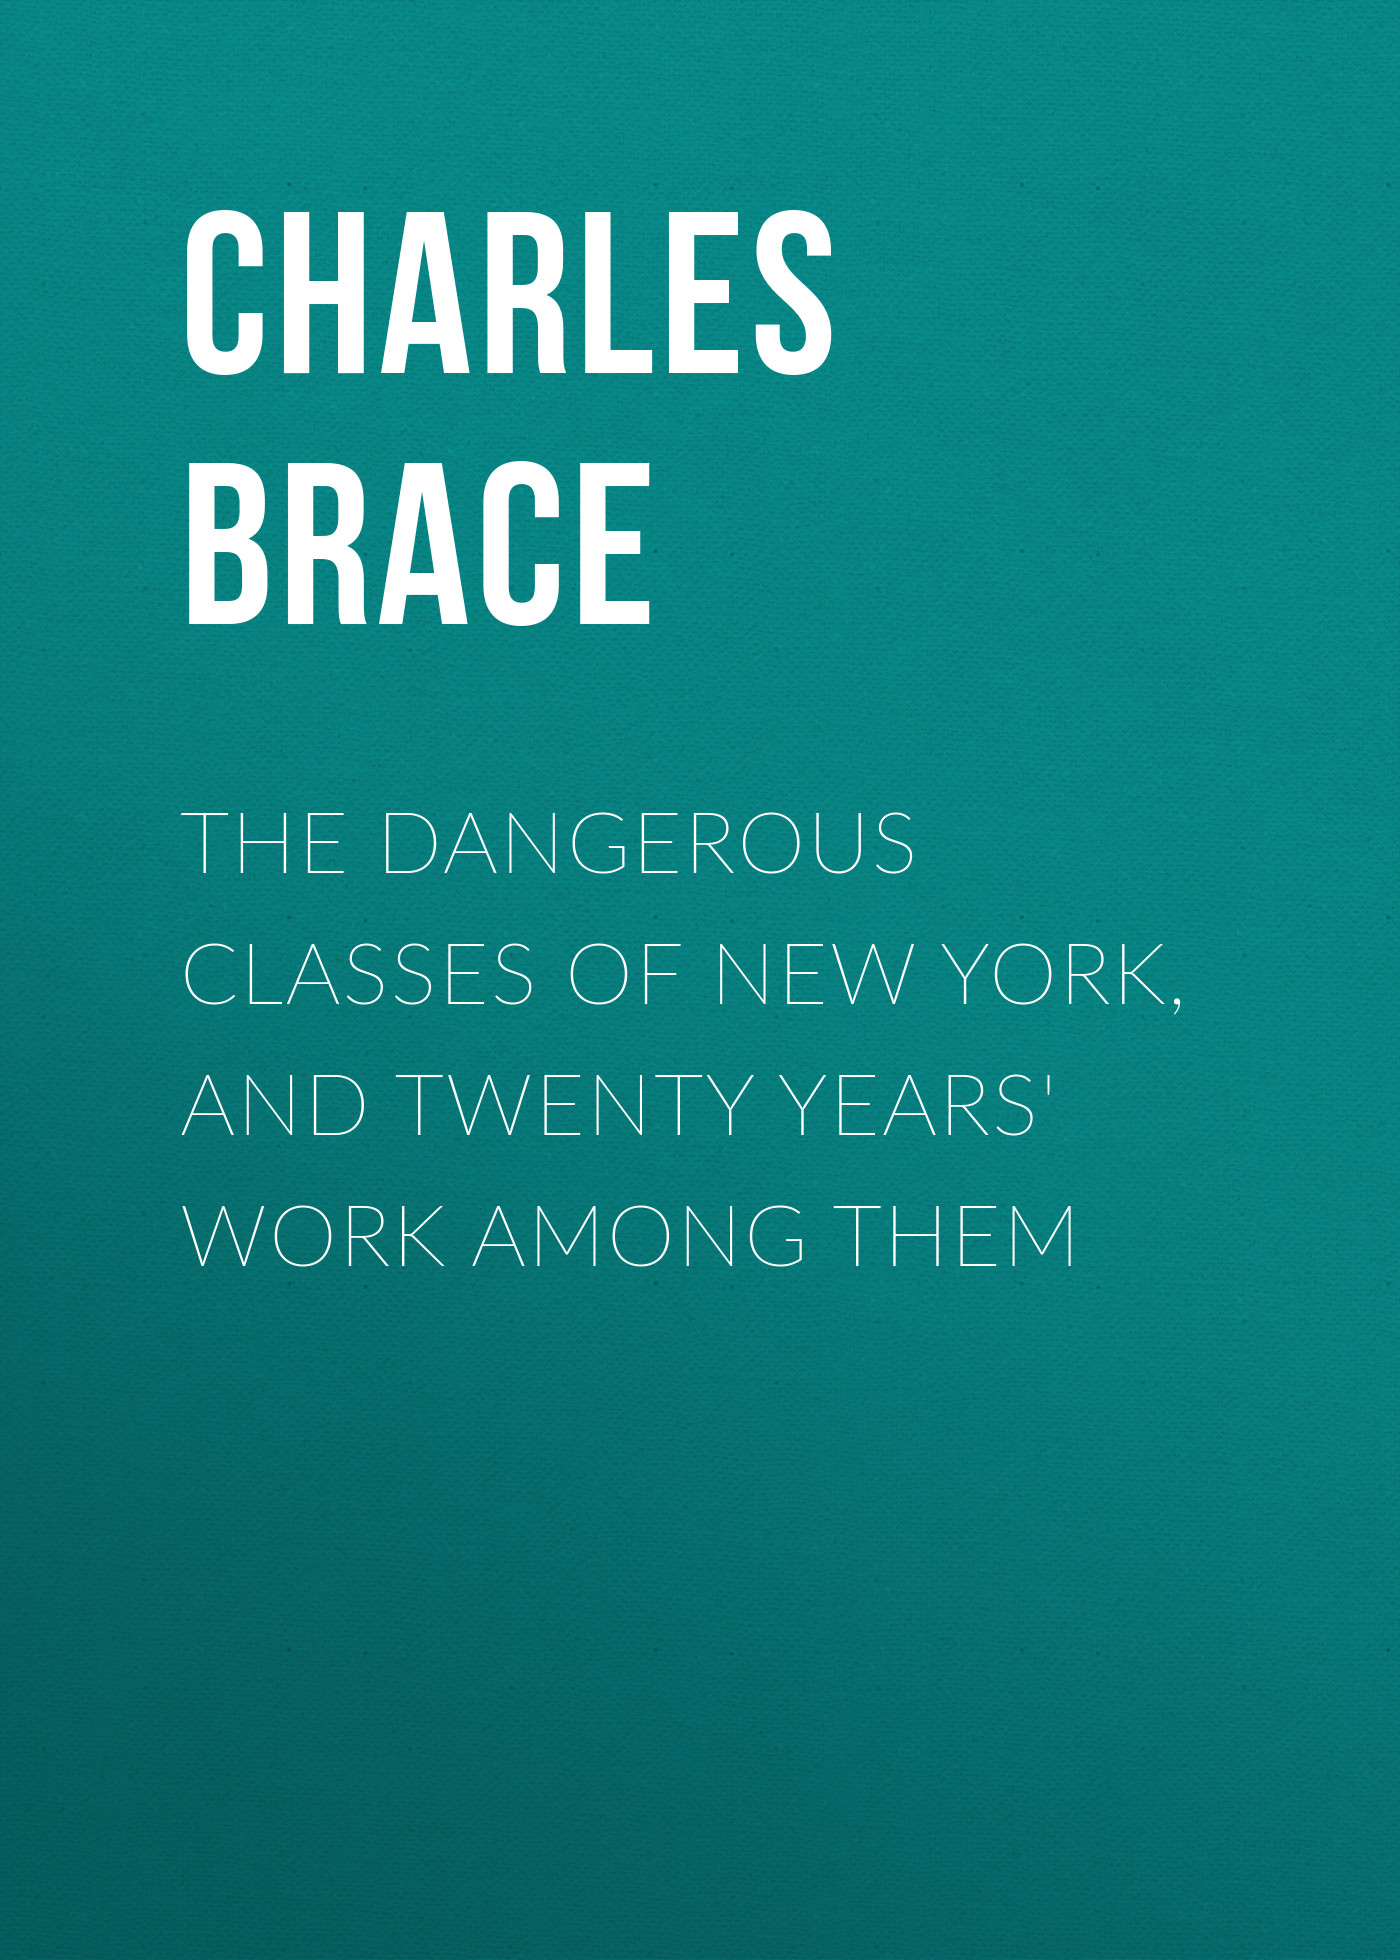 The Dangerous Classes of New York, and Twenty Years'Work Among Them